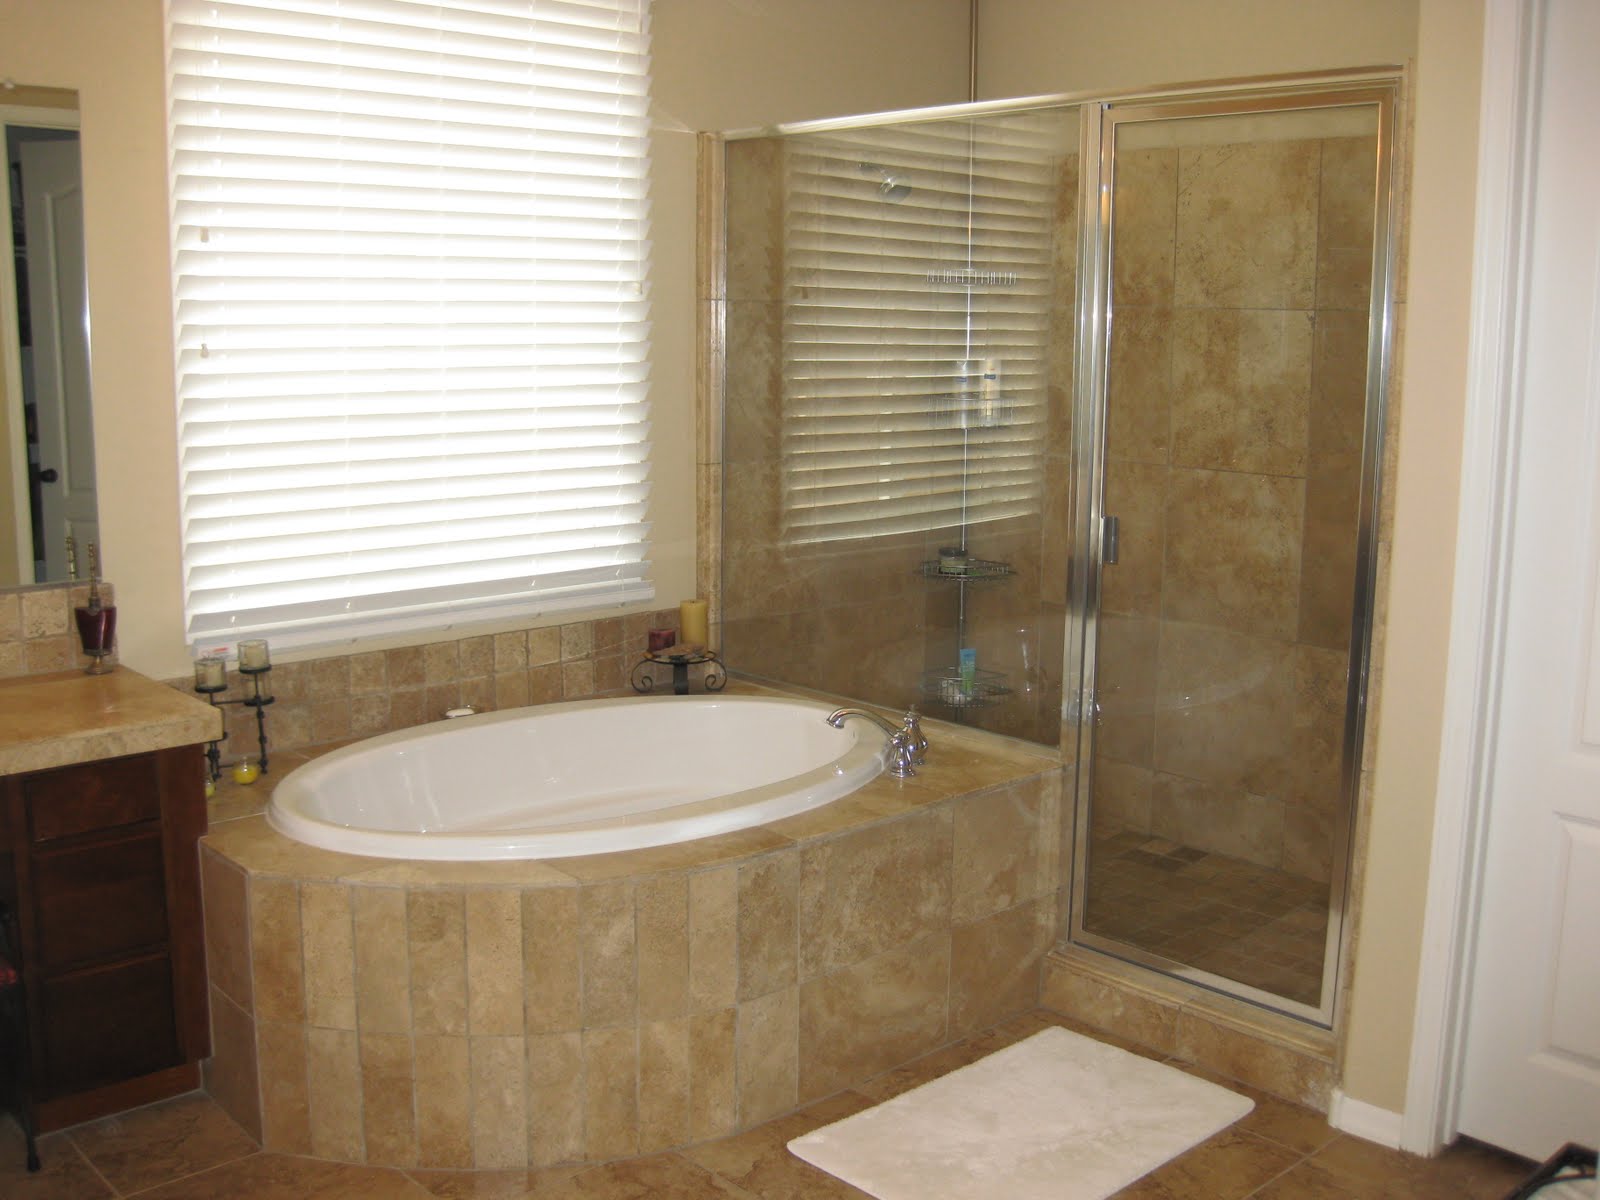  Bathroom  Tub  Shower  Combo  Options With Classy Recessed 